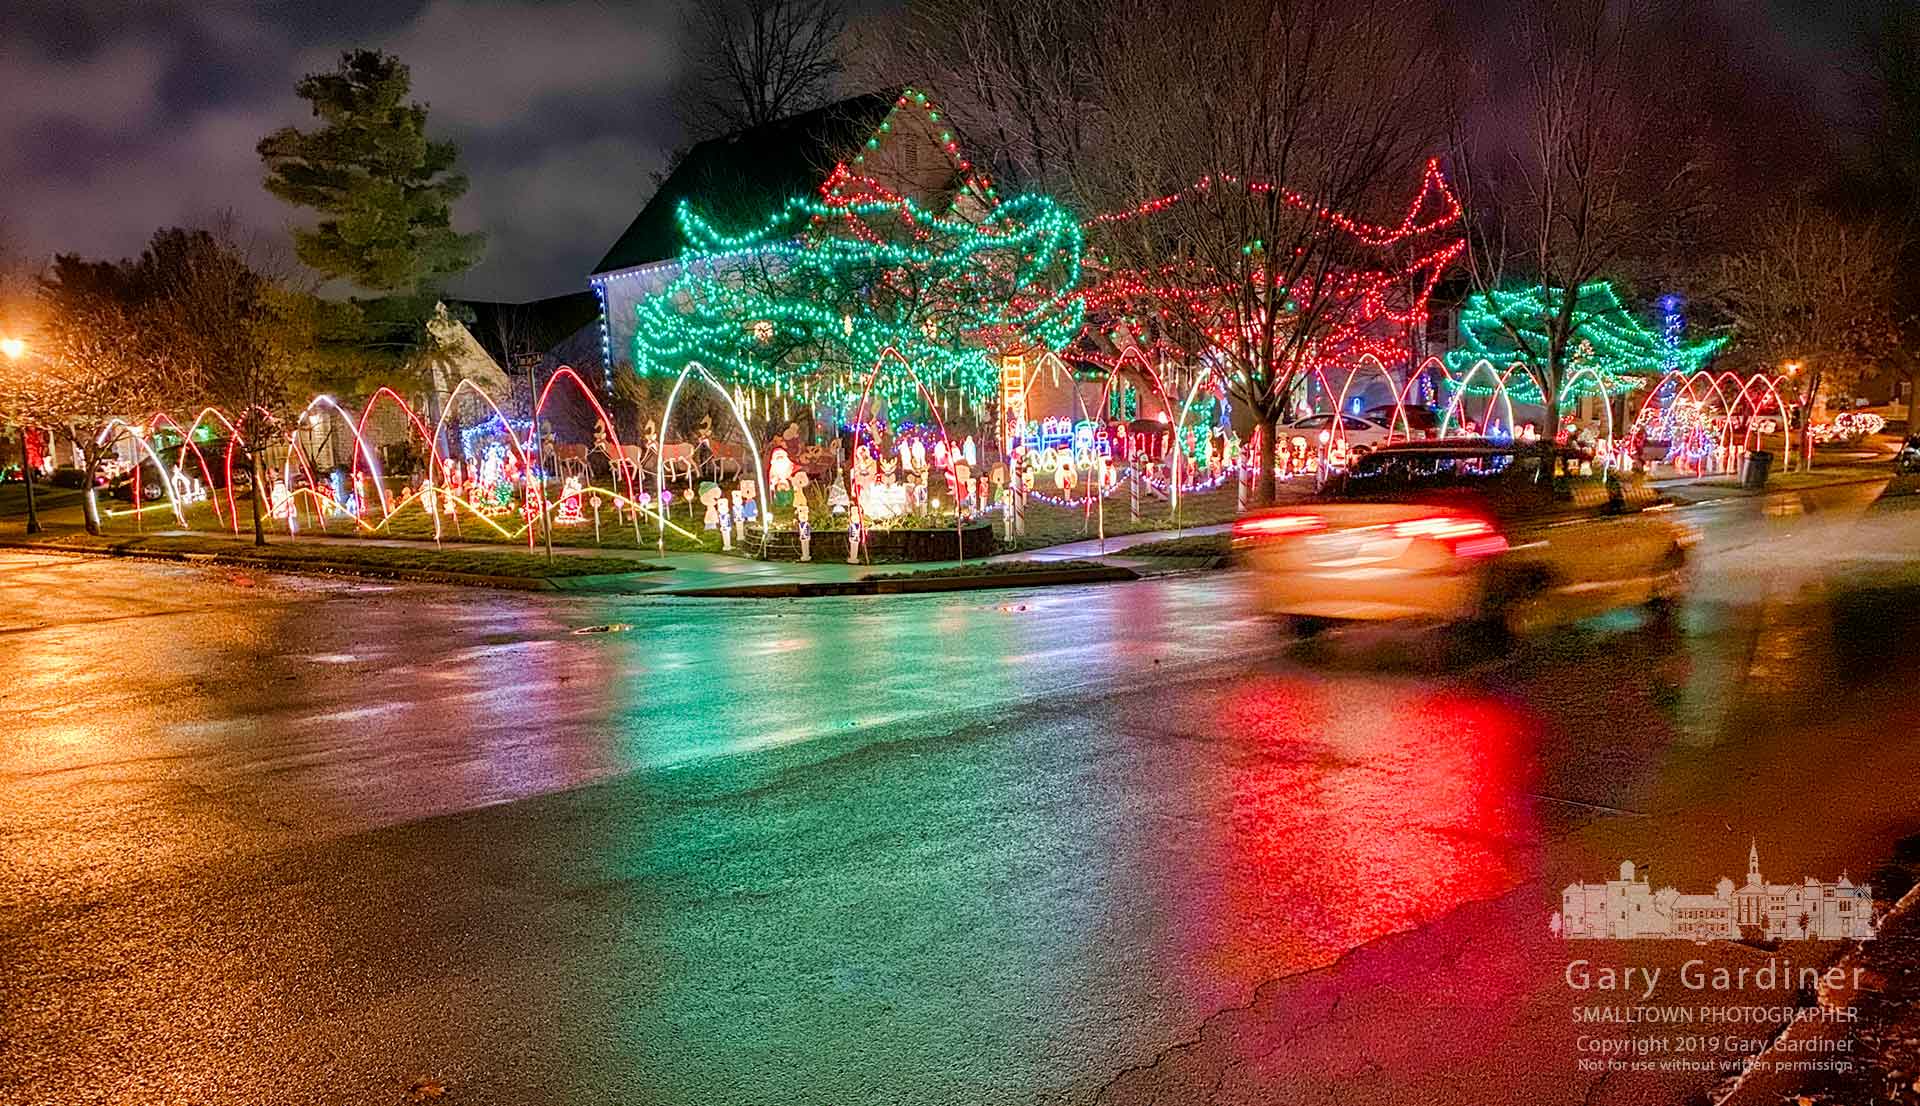 A car drives past the annual Christmas lights display in front of a home on Olde Mill Drive in Westerville. My Final Photo for Nov. 30, 2019.